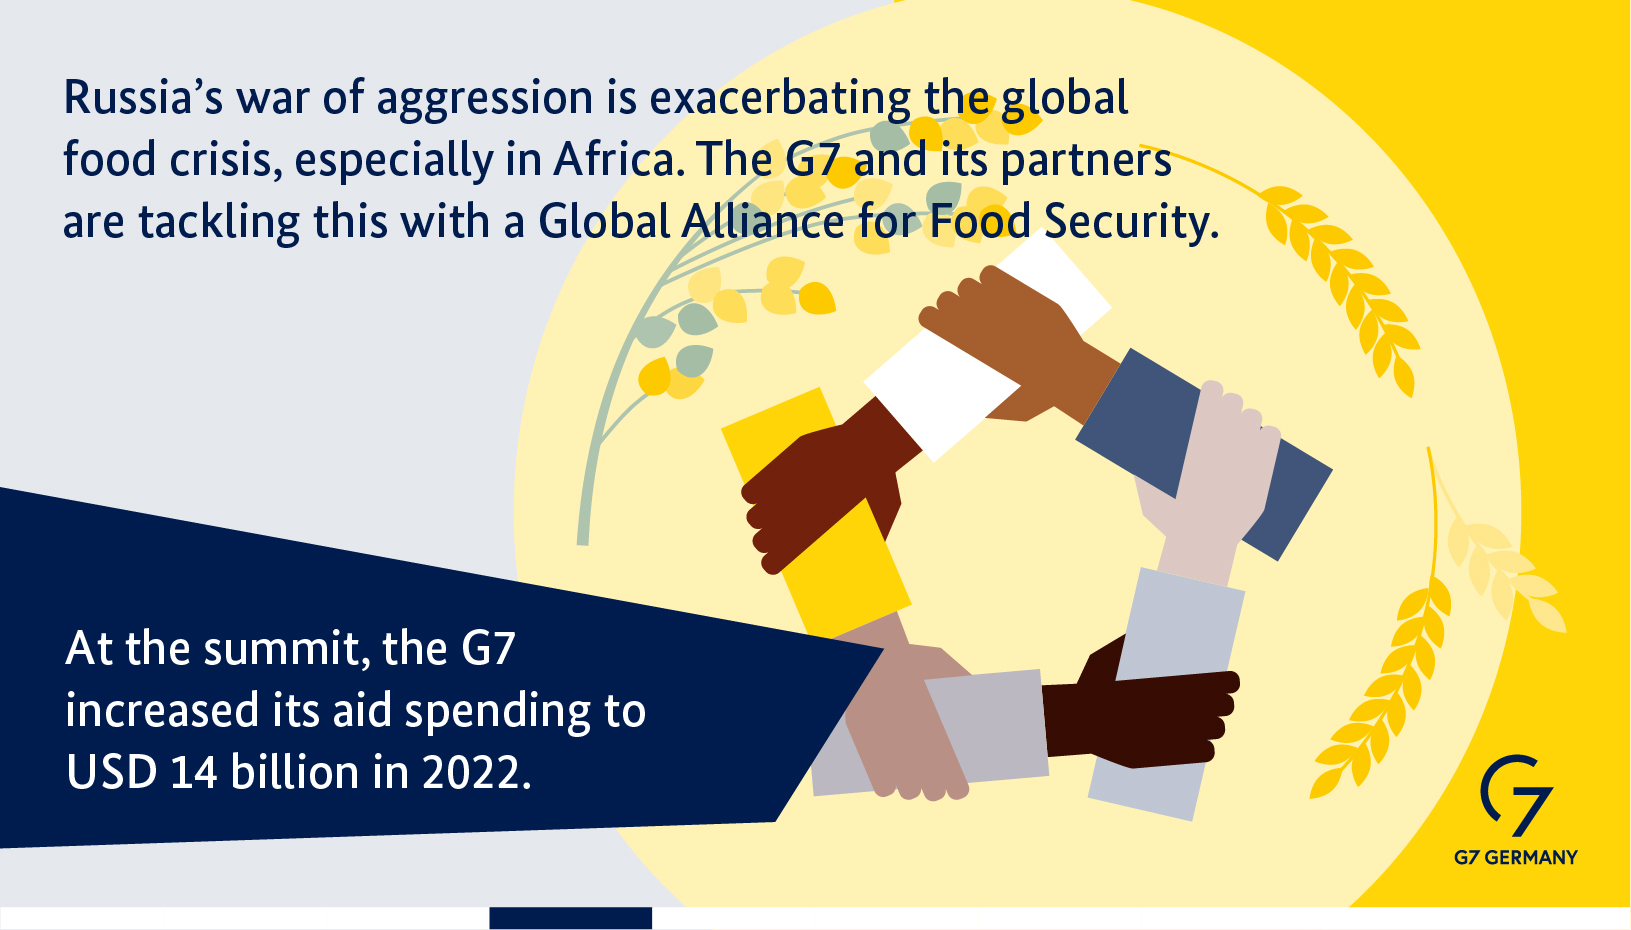 The Russian war of aggression is exacerbating the global food crisis, especially in Africa. The G7 and its partners are tackling this with an Global Alliance for Food Security. At the summit, the G7 increased its aid spending to 14 billion US dollars in 2022.